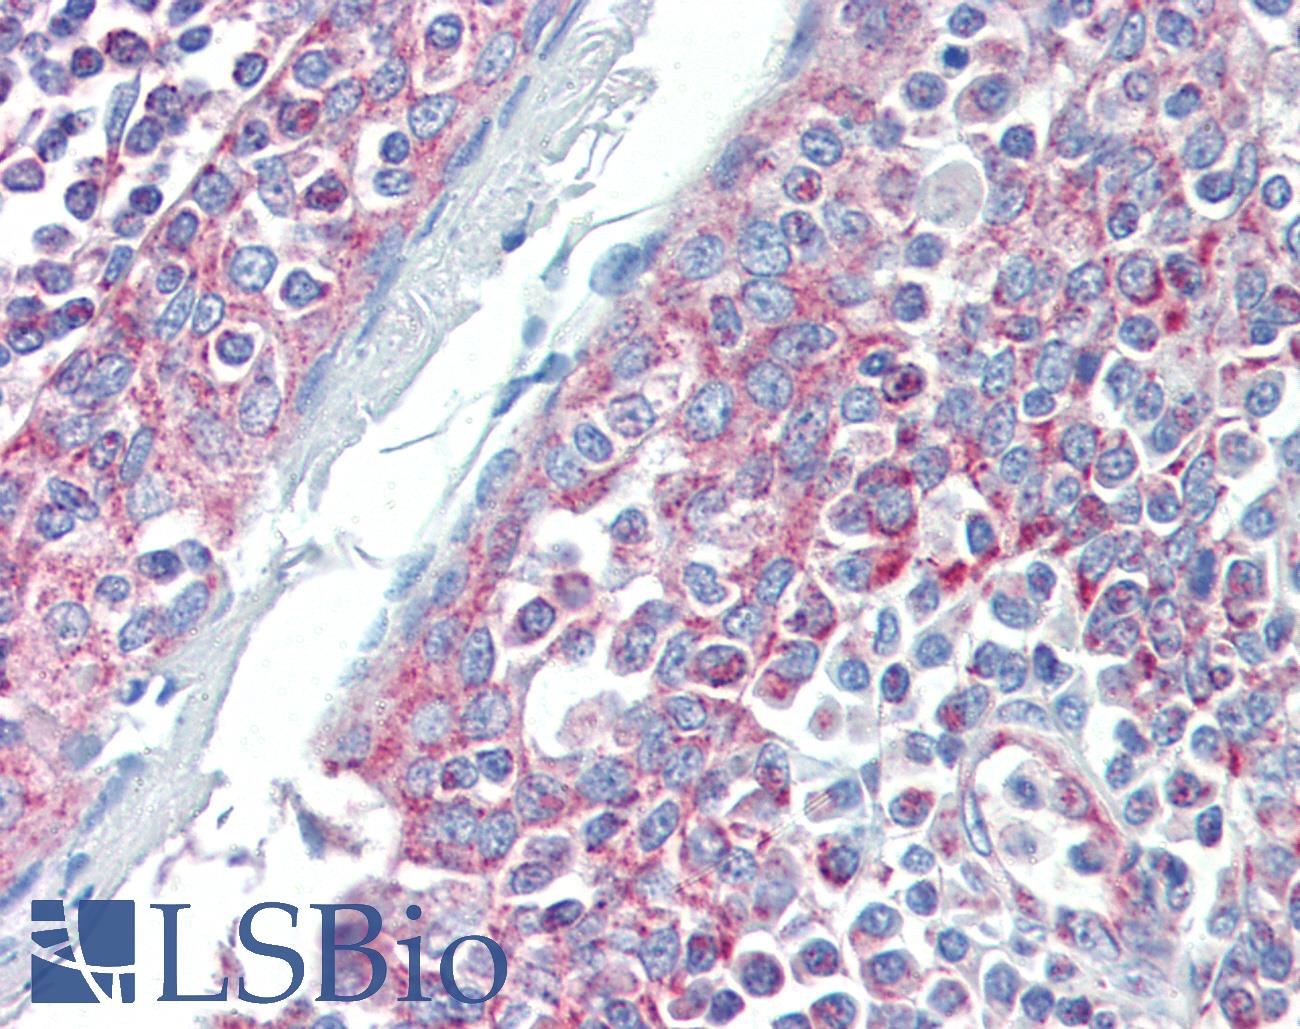 DIABLO / SMAC Antibody - Anti-DIABLO / SMAC antibody IHC of human tonsil. Immunohistochemistry of formalin-fixed, paraffin-embedded tissue after heat-induced antigen retrieval. Antibody concentration 10 ug/ml.